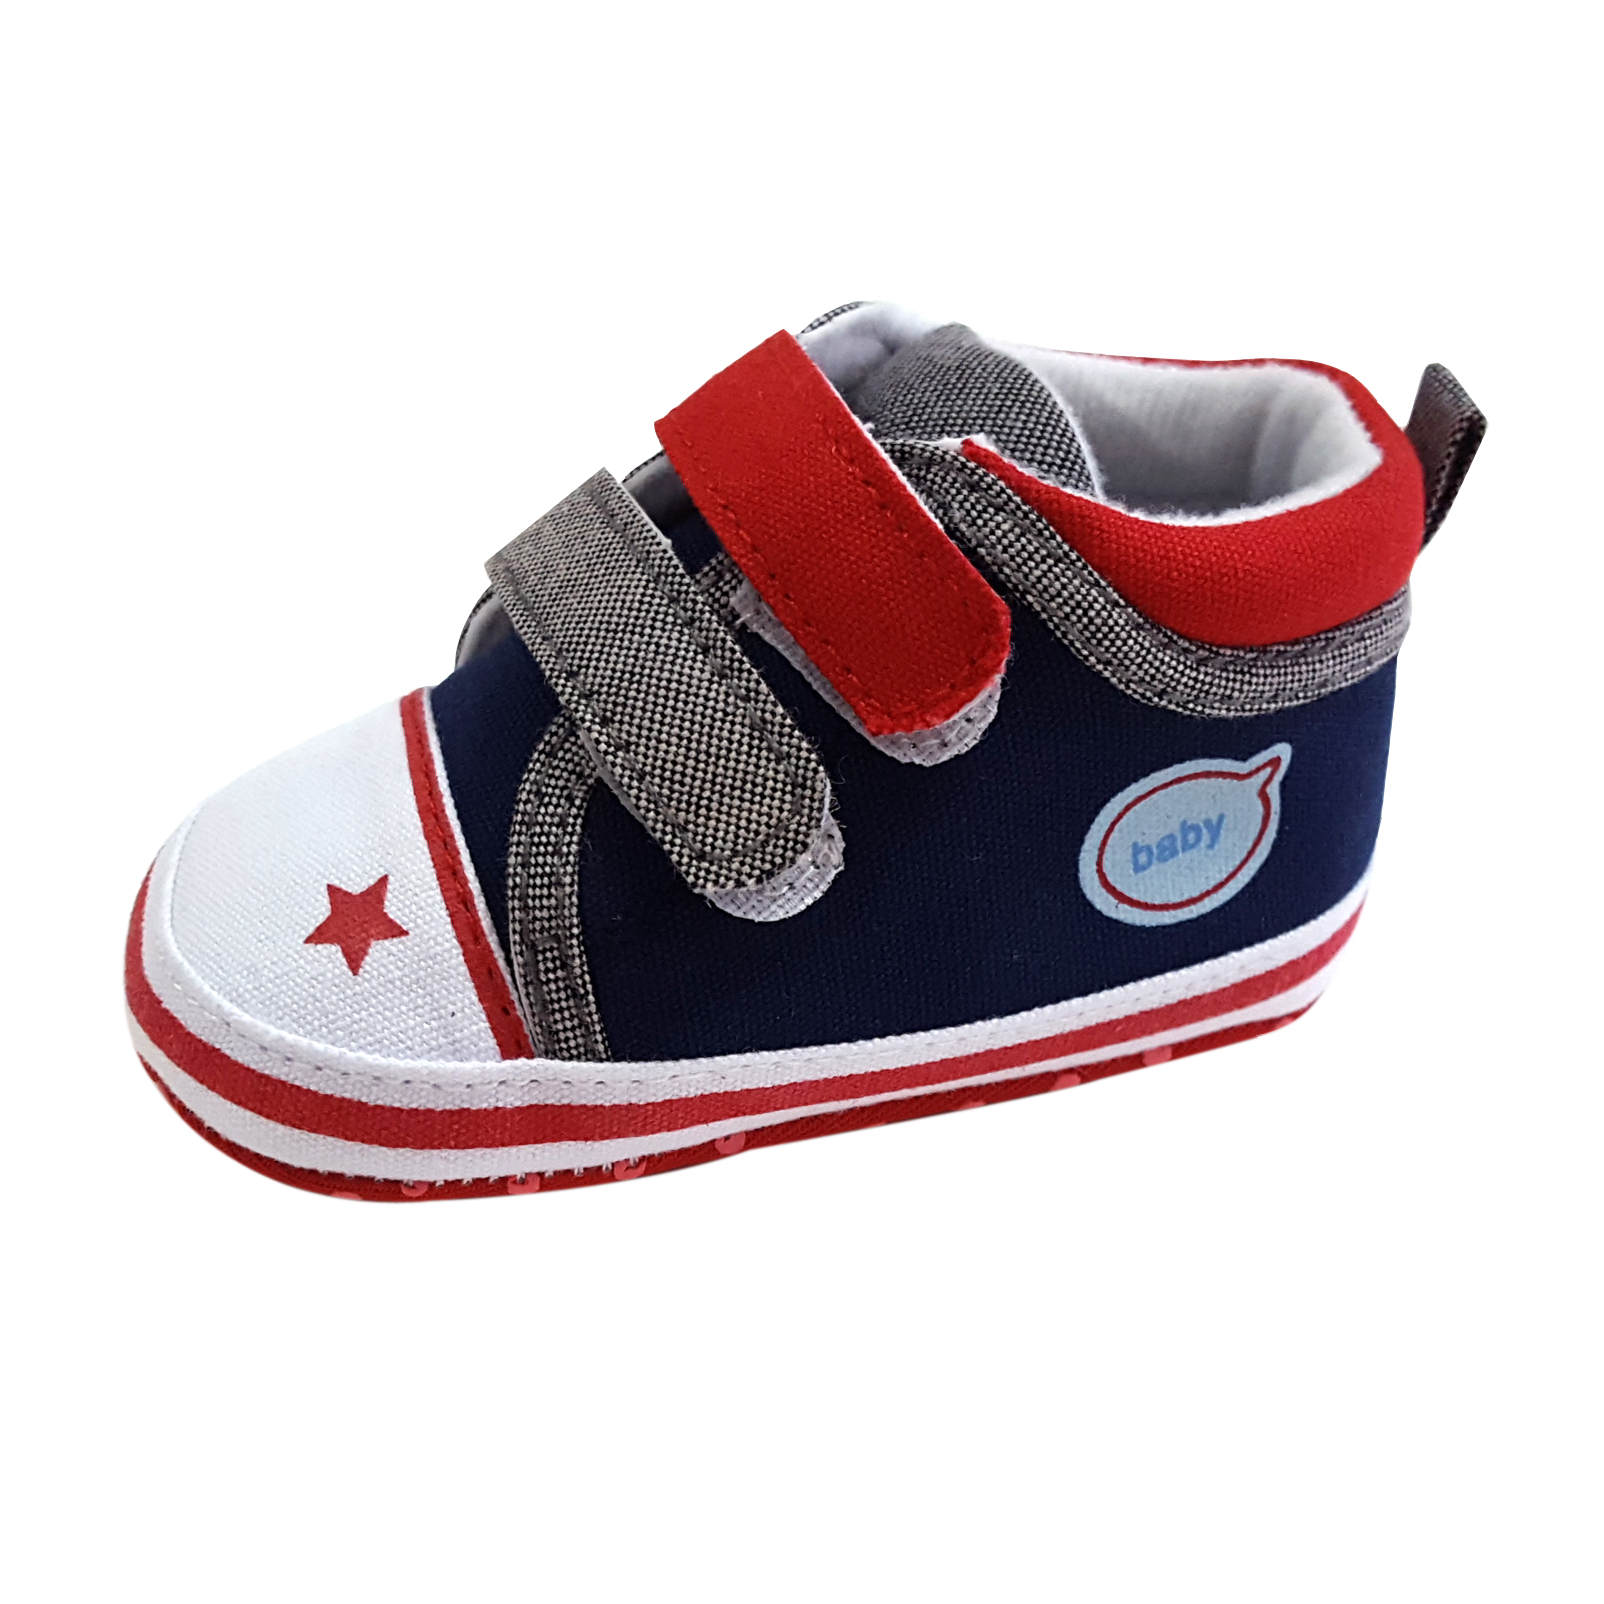 Levi (Pre-Walker Baby Shoes) - Navy/Red Special Offer